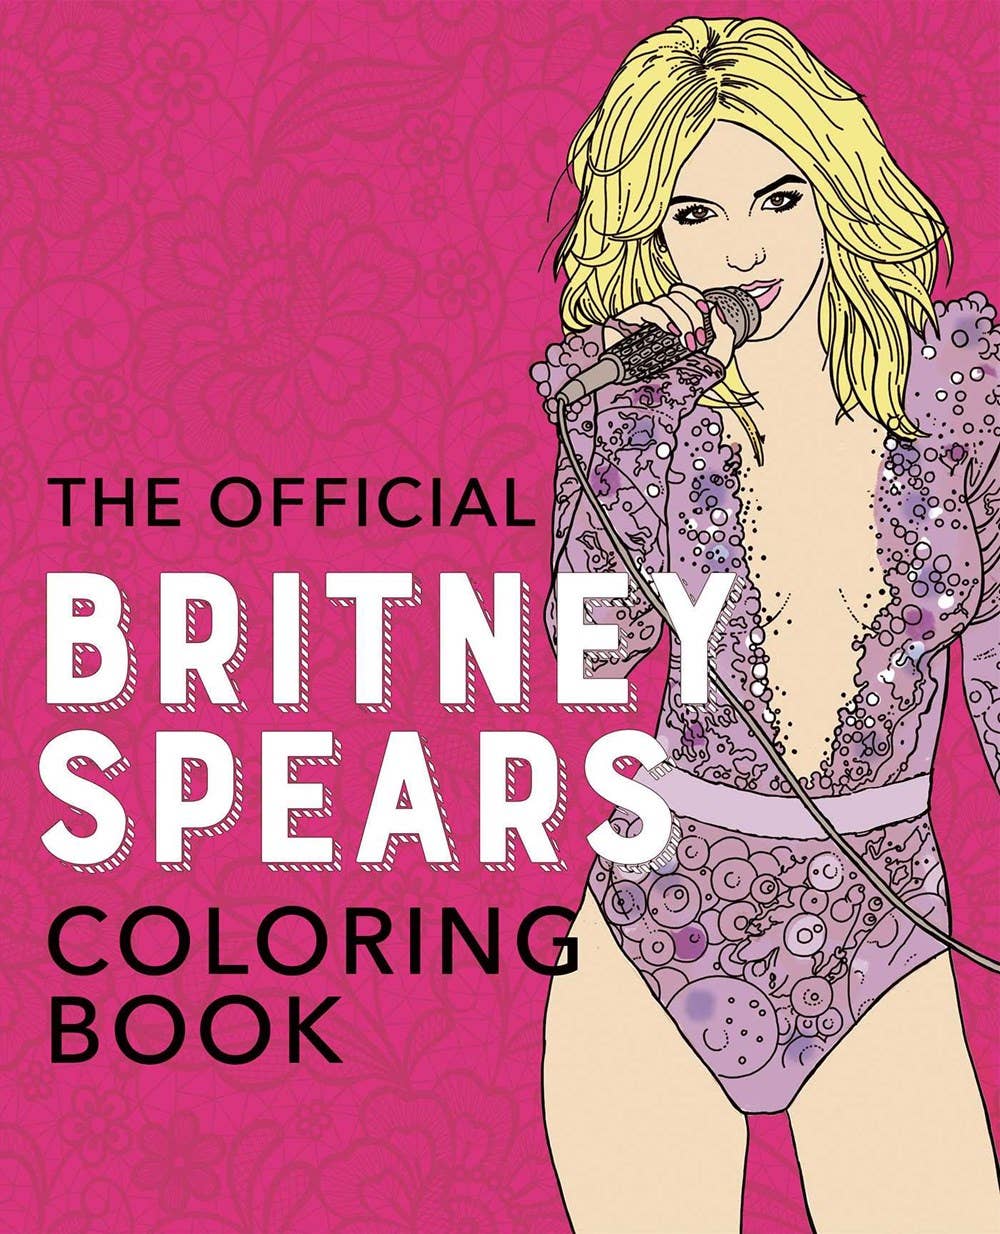 Microcosm Publishing & Distribution - Official Britney Spears Coloring Book